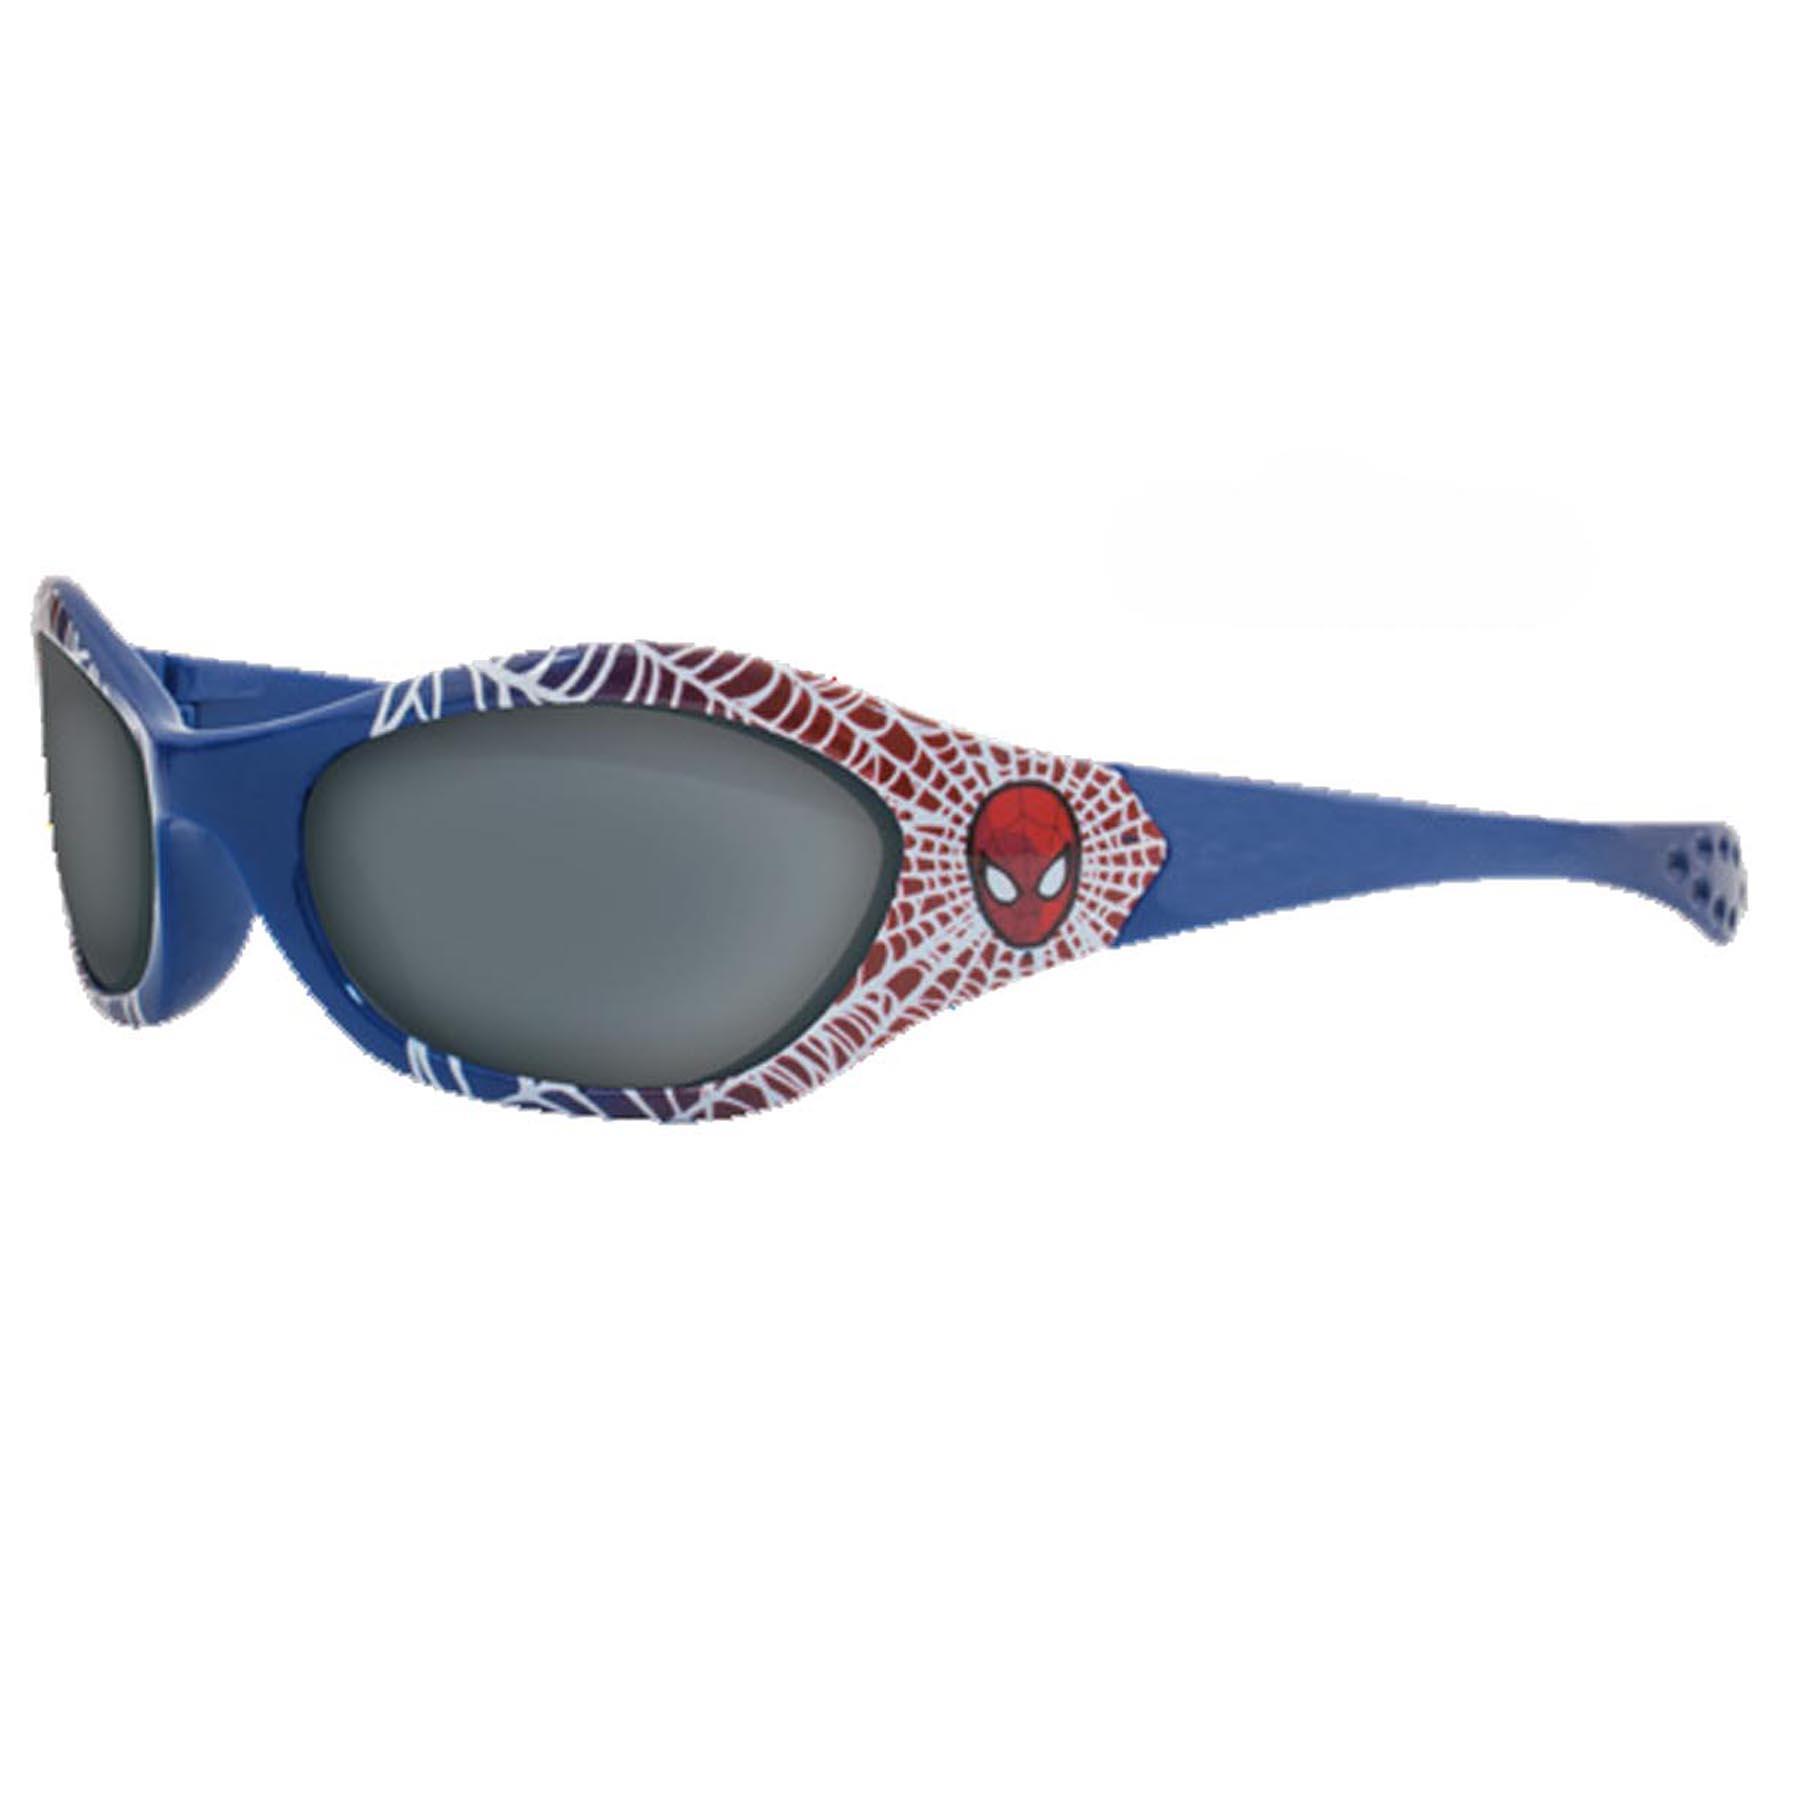 Superheroes Children's Sunglasses UV protection for Holiday - Marvel Spiderman SP10